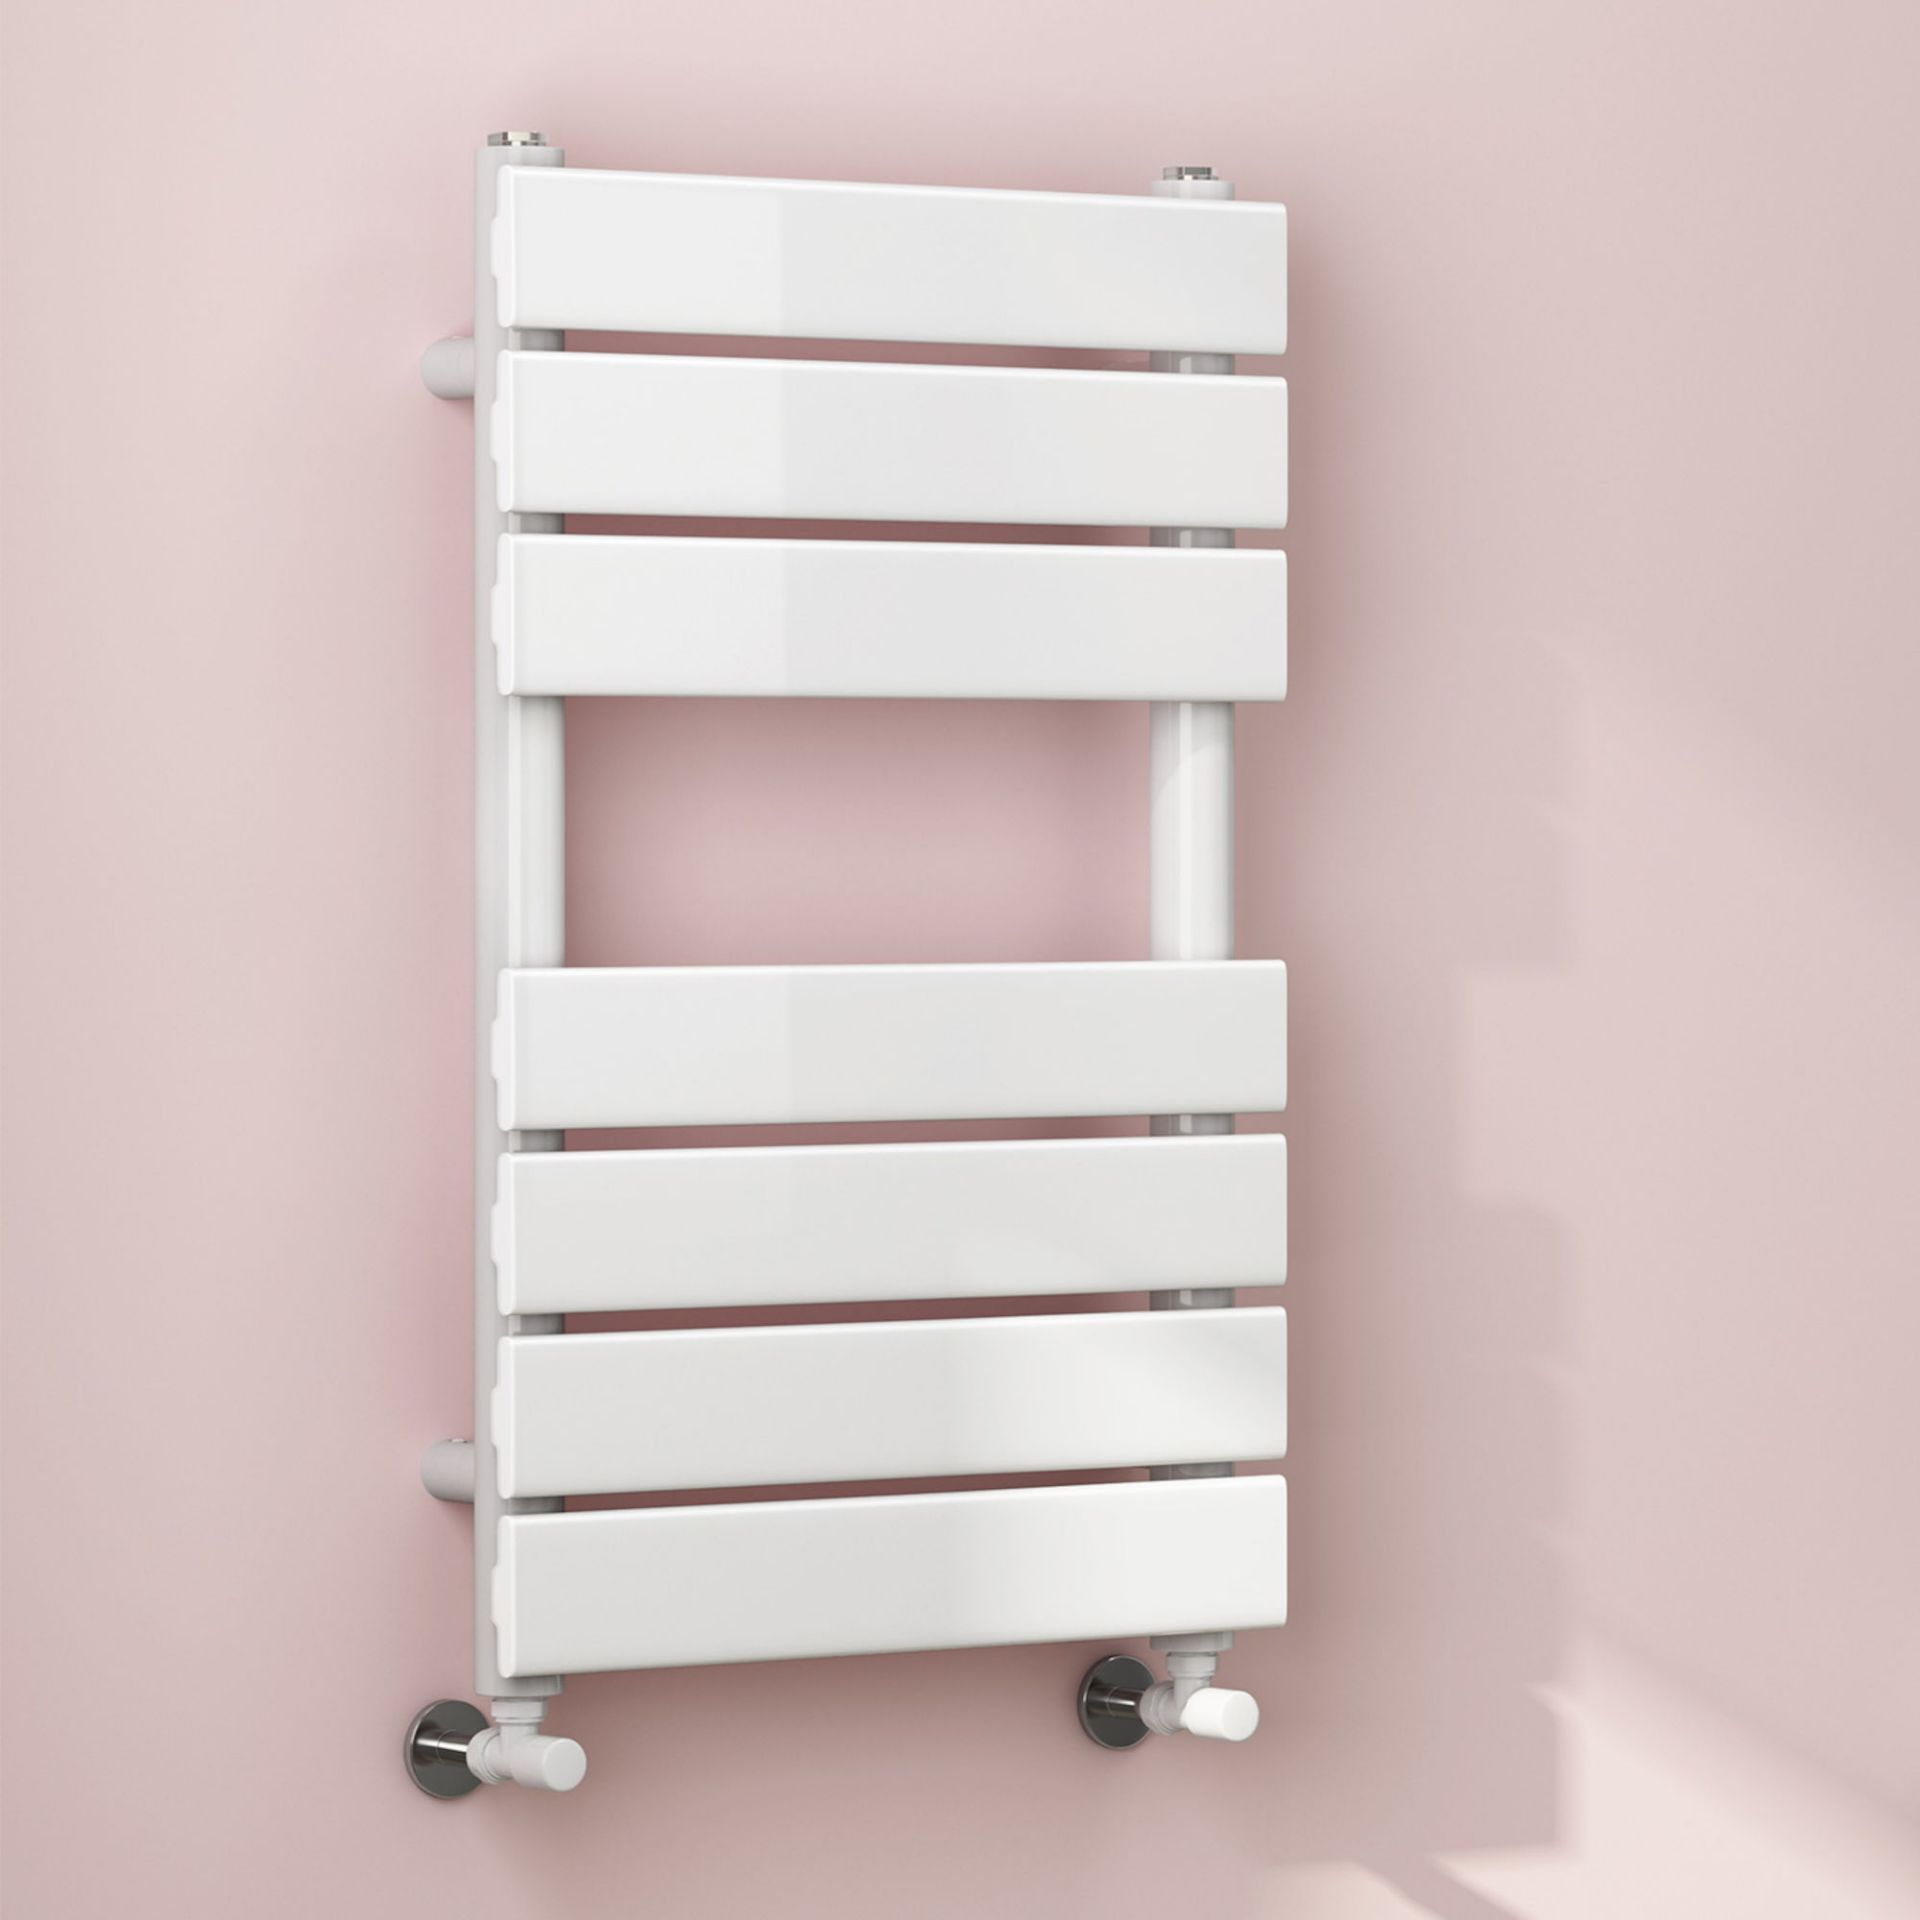 (EY12) 650x400mm White Flat Panel Ladder Towel Radiator. Made from low carbon steel with a high